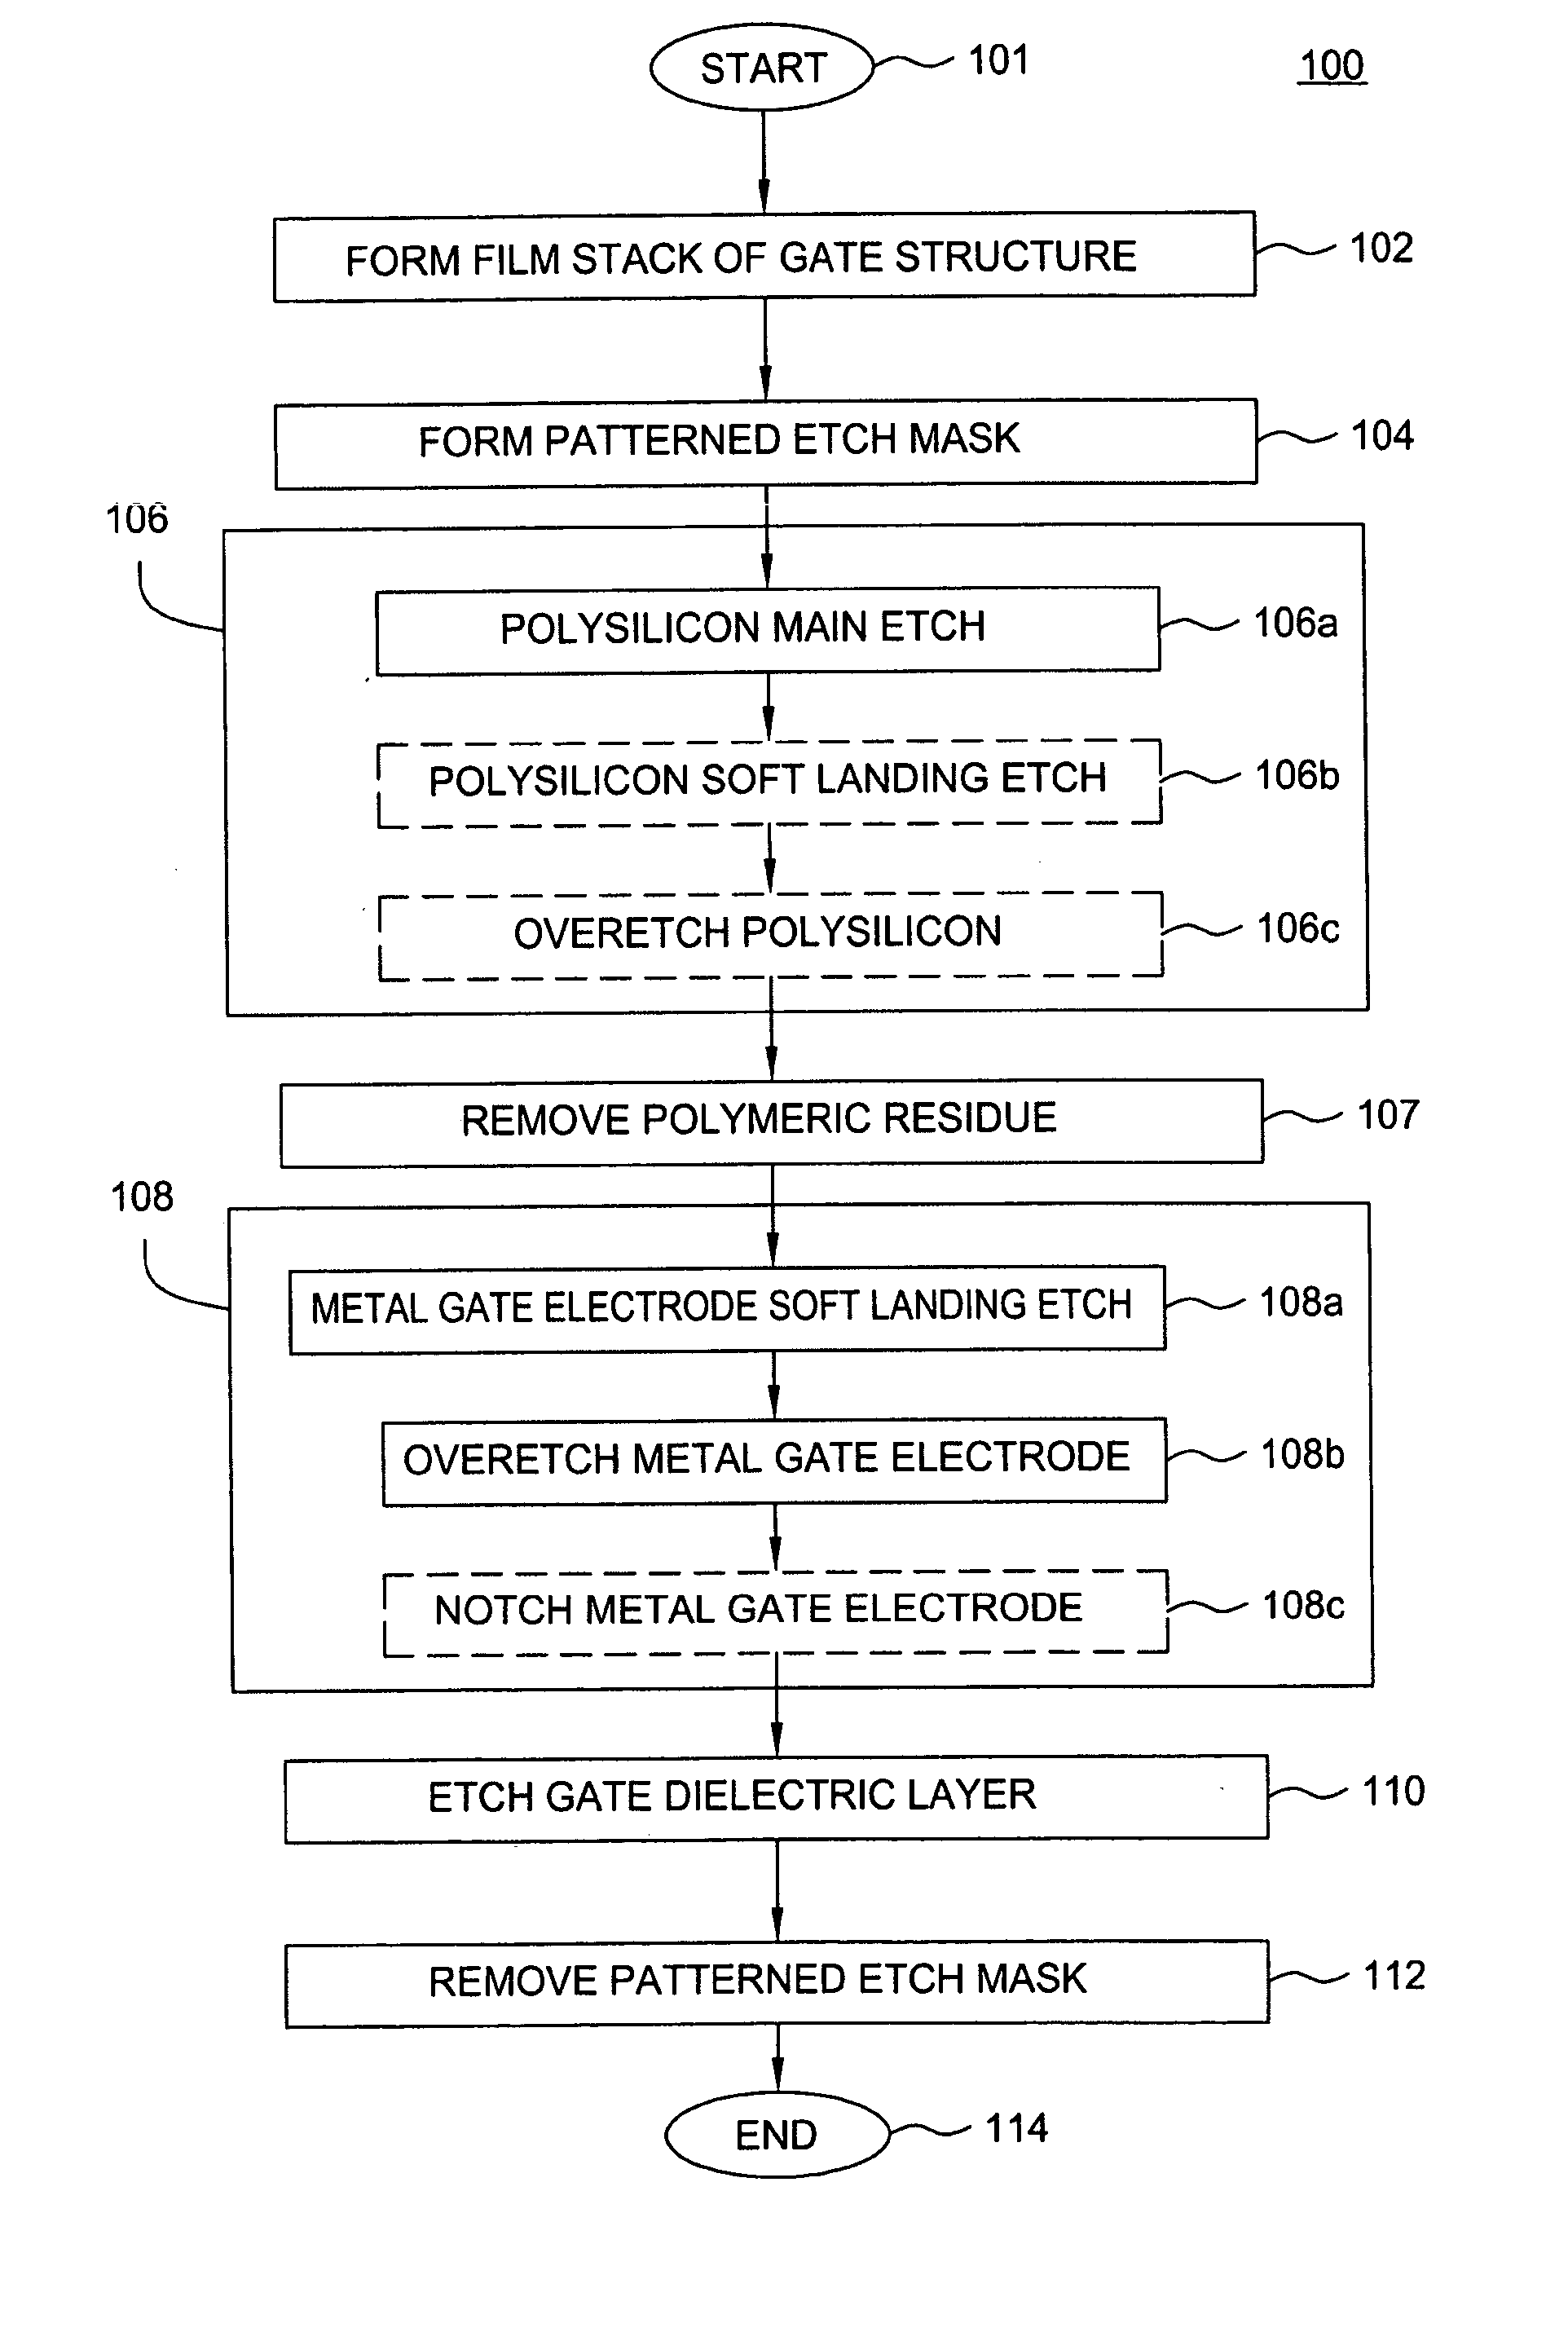 Method of fabricating a gate structure of a field effect transistor having a metal-containing gate electrode